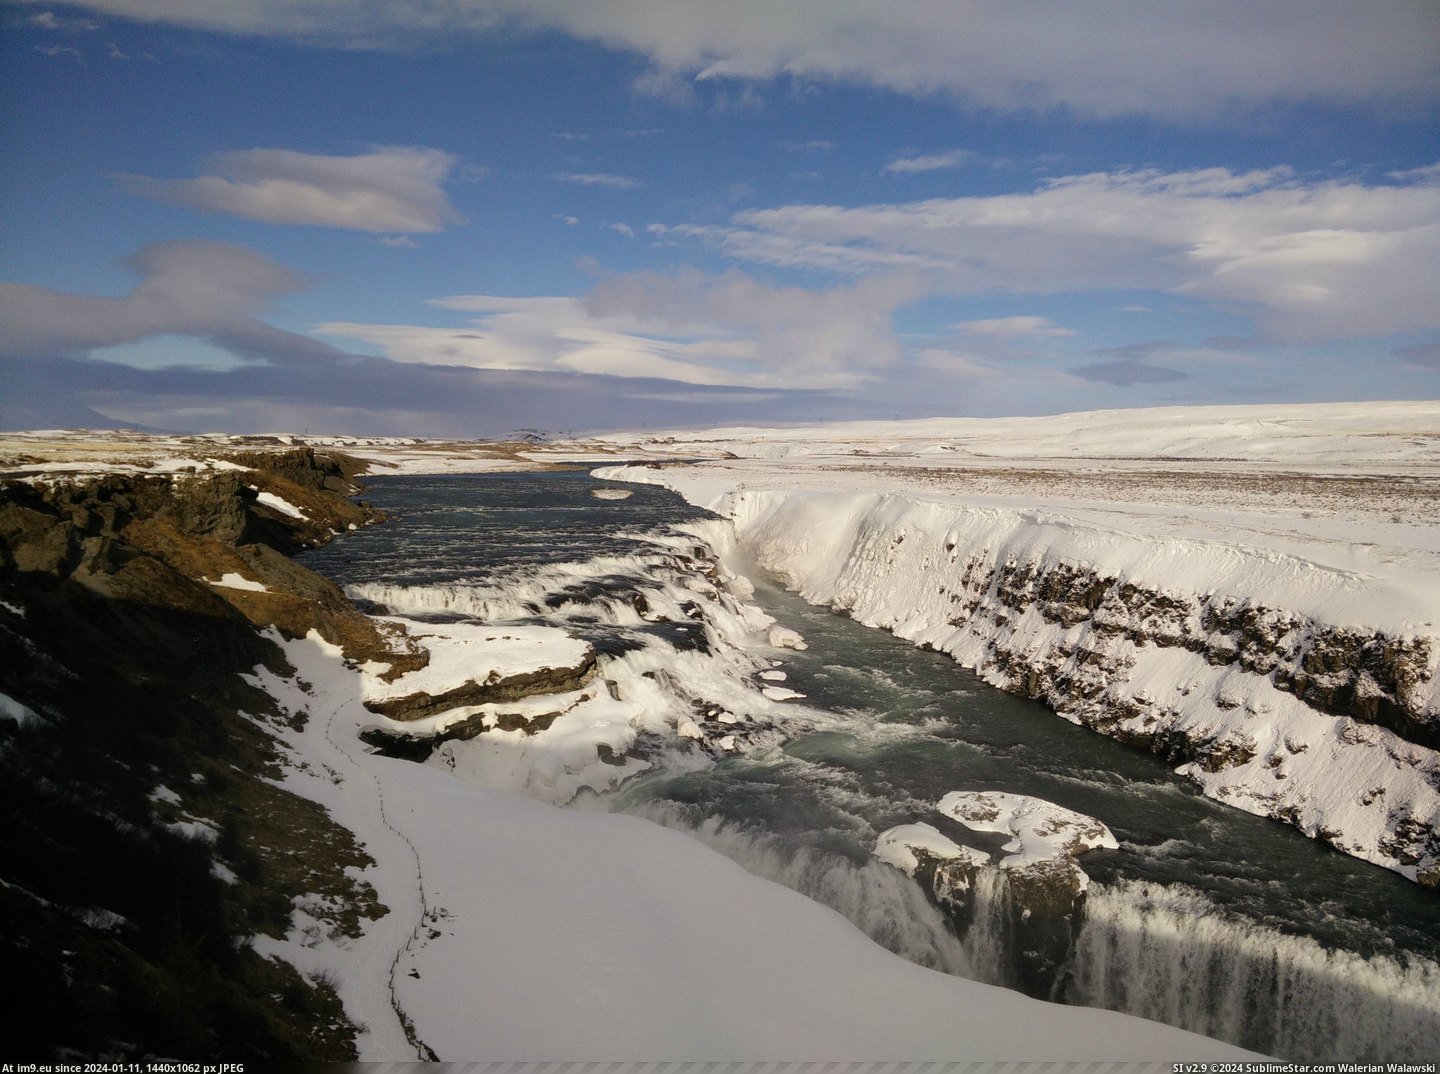 #Snow #Iceland #March #Gullfoss #Covered #Waterfall [Earthporn] Snow covered Gullfoss Waterfall, Iceland, in March 2015.  [3156x2340] Pic. (Image of album My r/EARTHPORN favs))